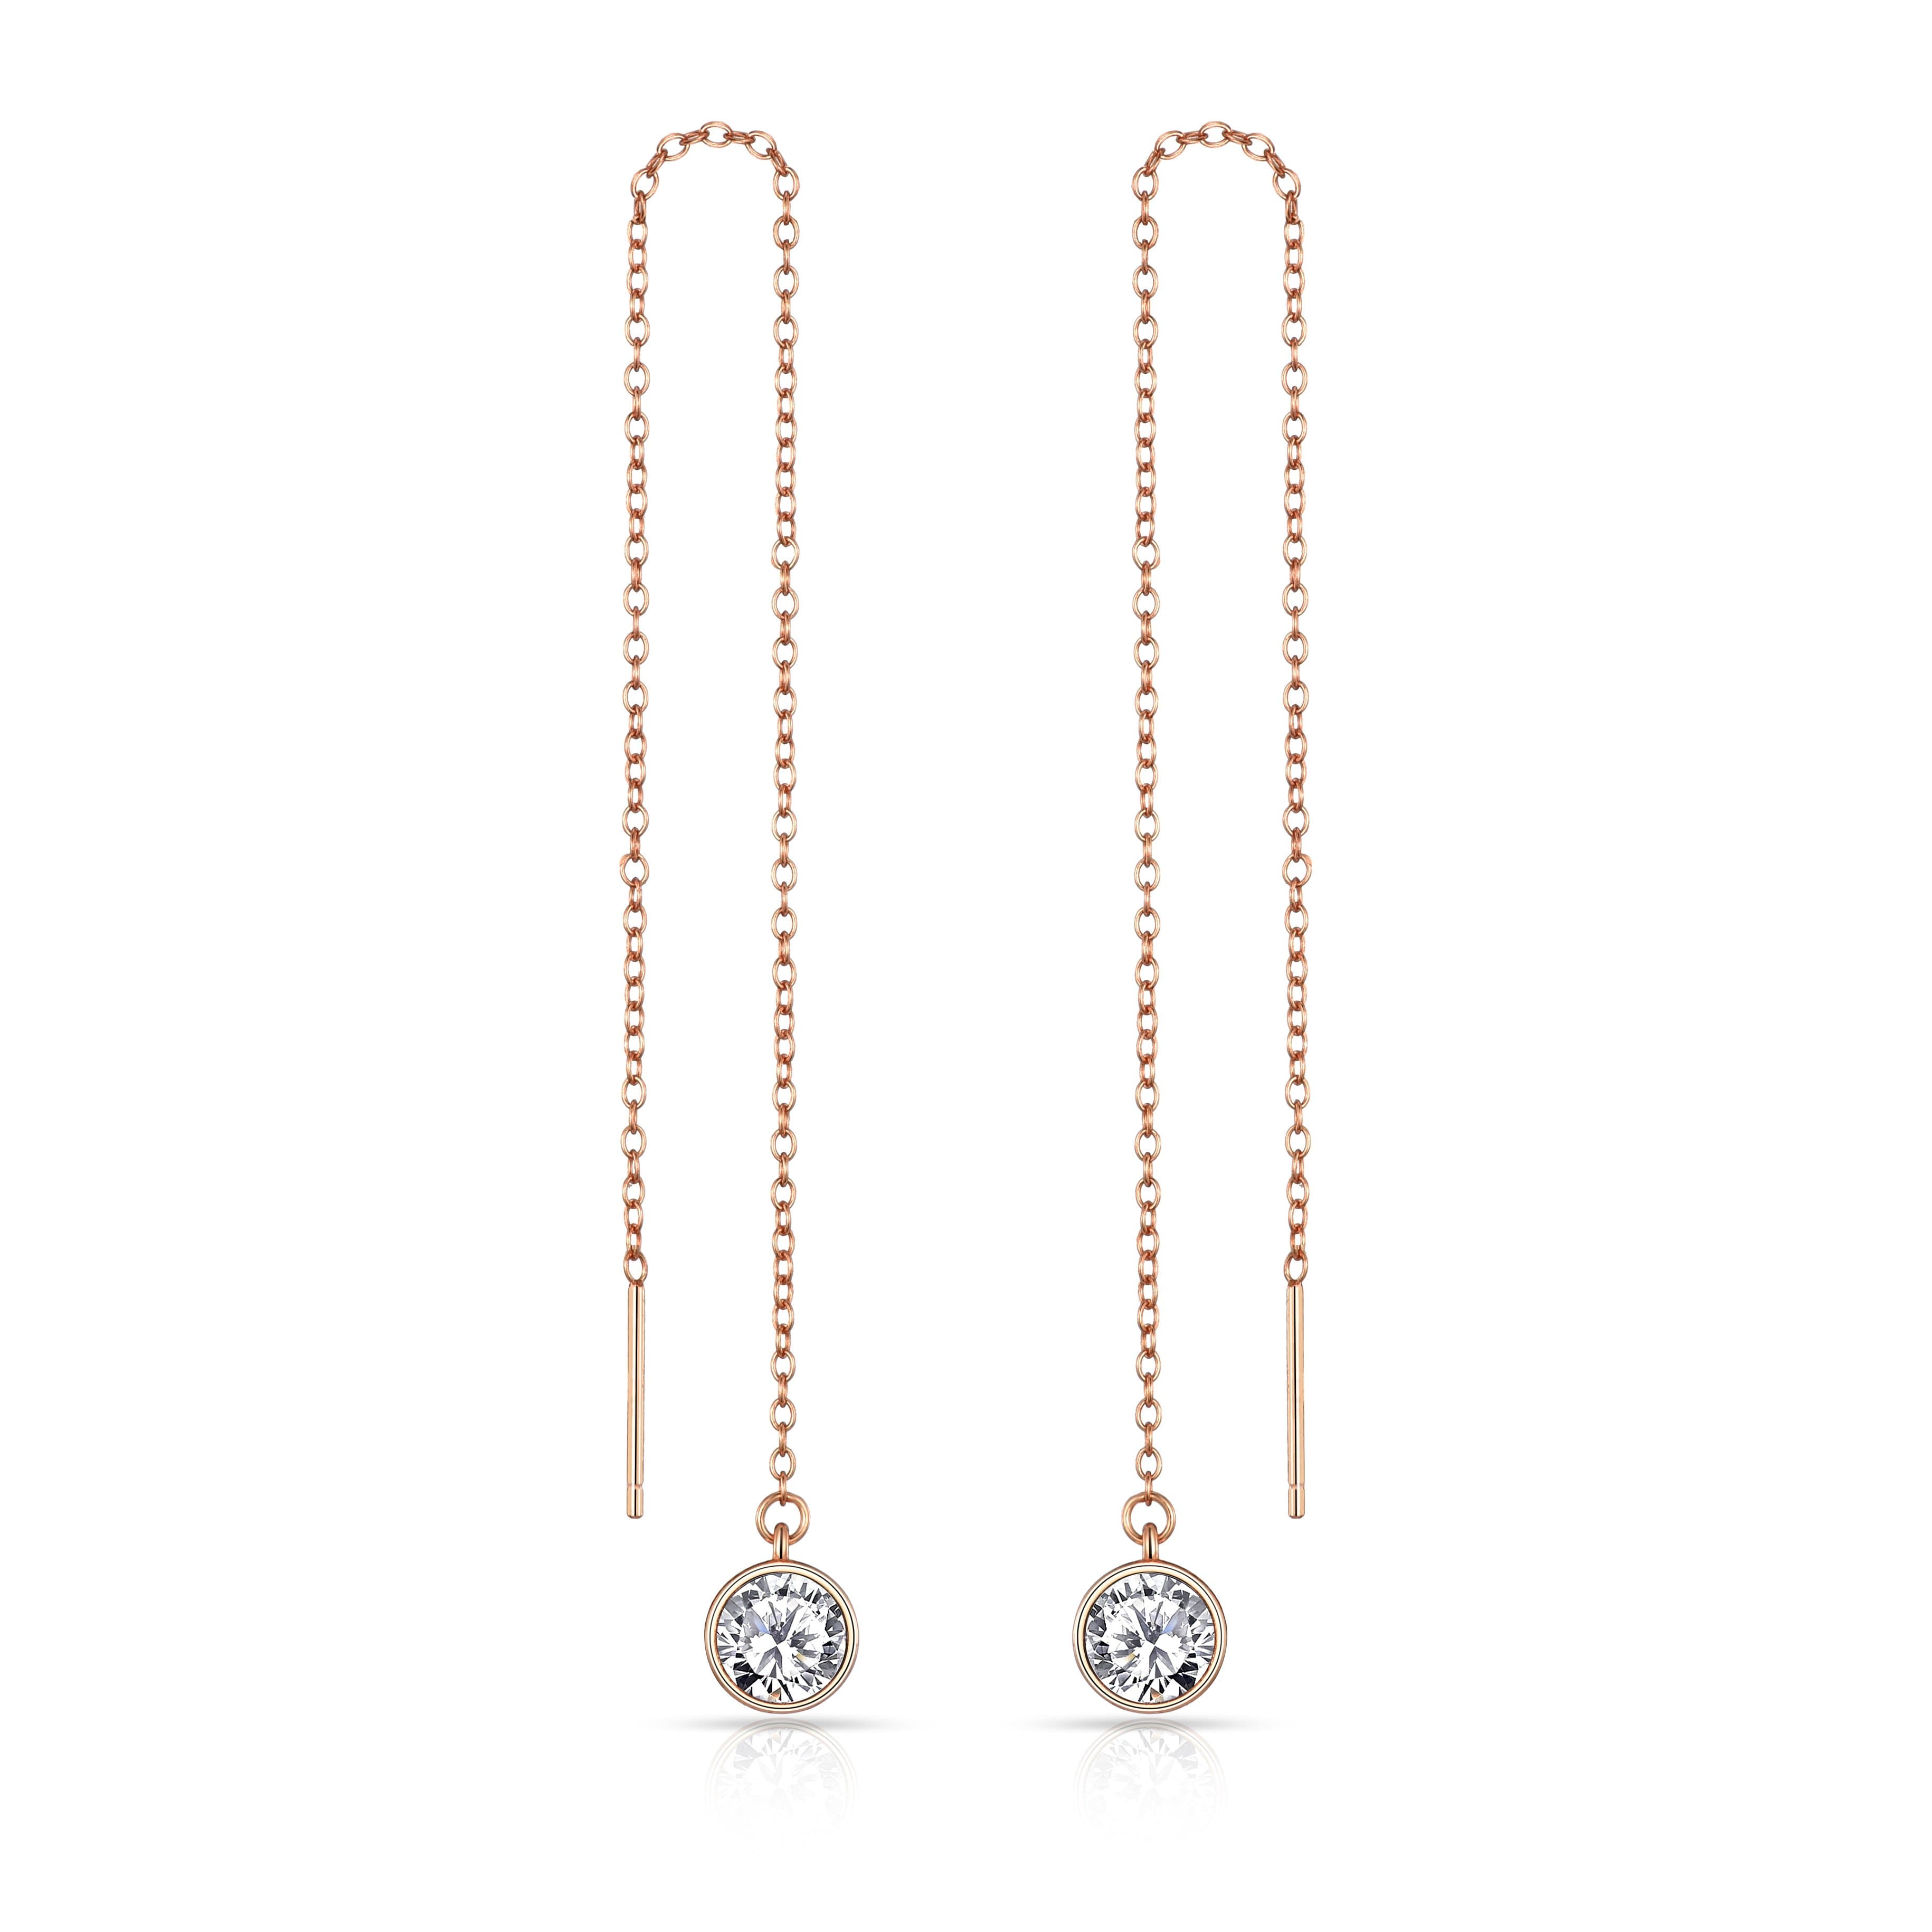 Rose Gold Plated Sterling Silver Thread Earrings Created with Zircondia® Crystals by Philip Jones Jewellery